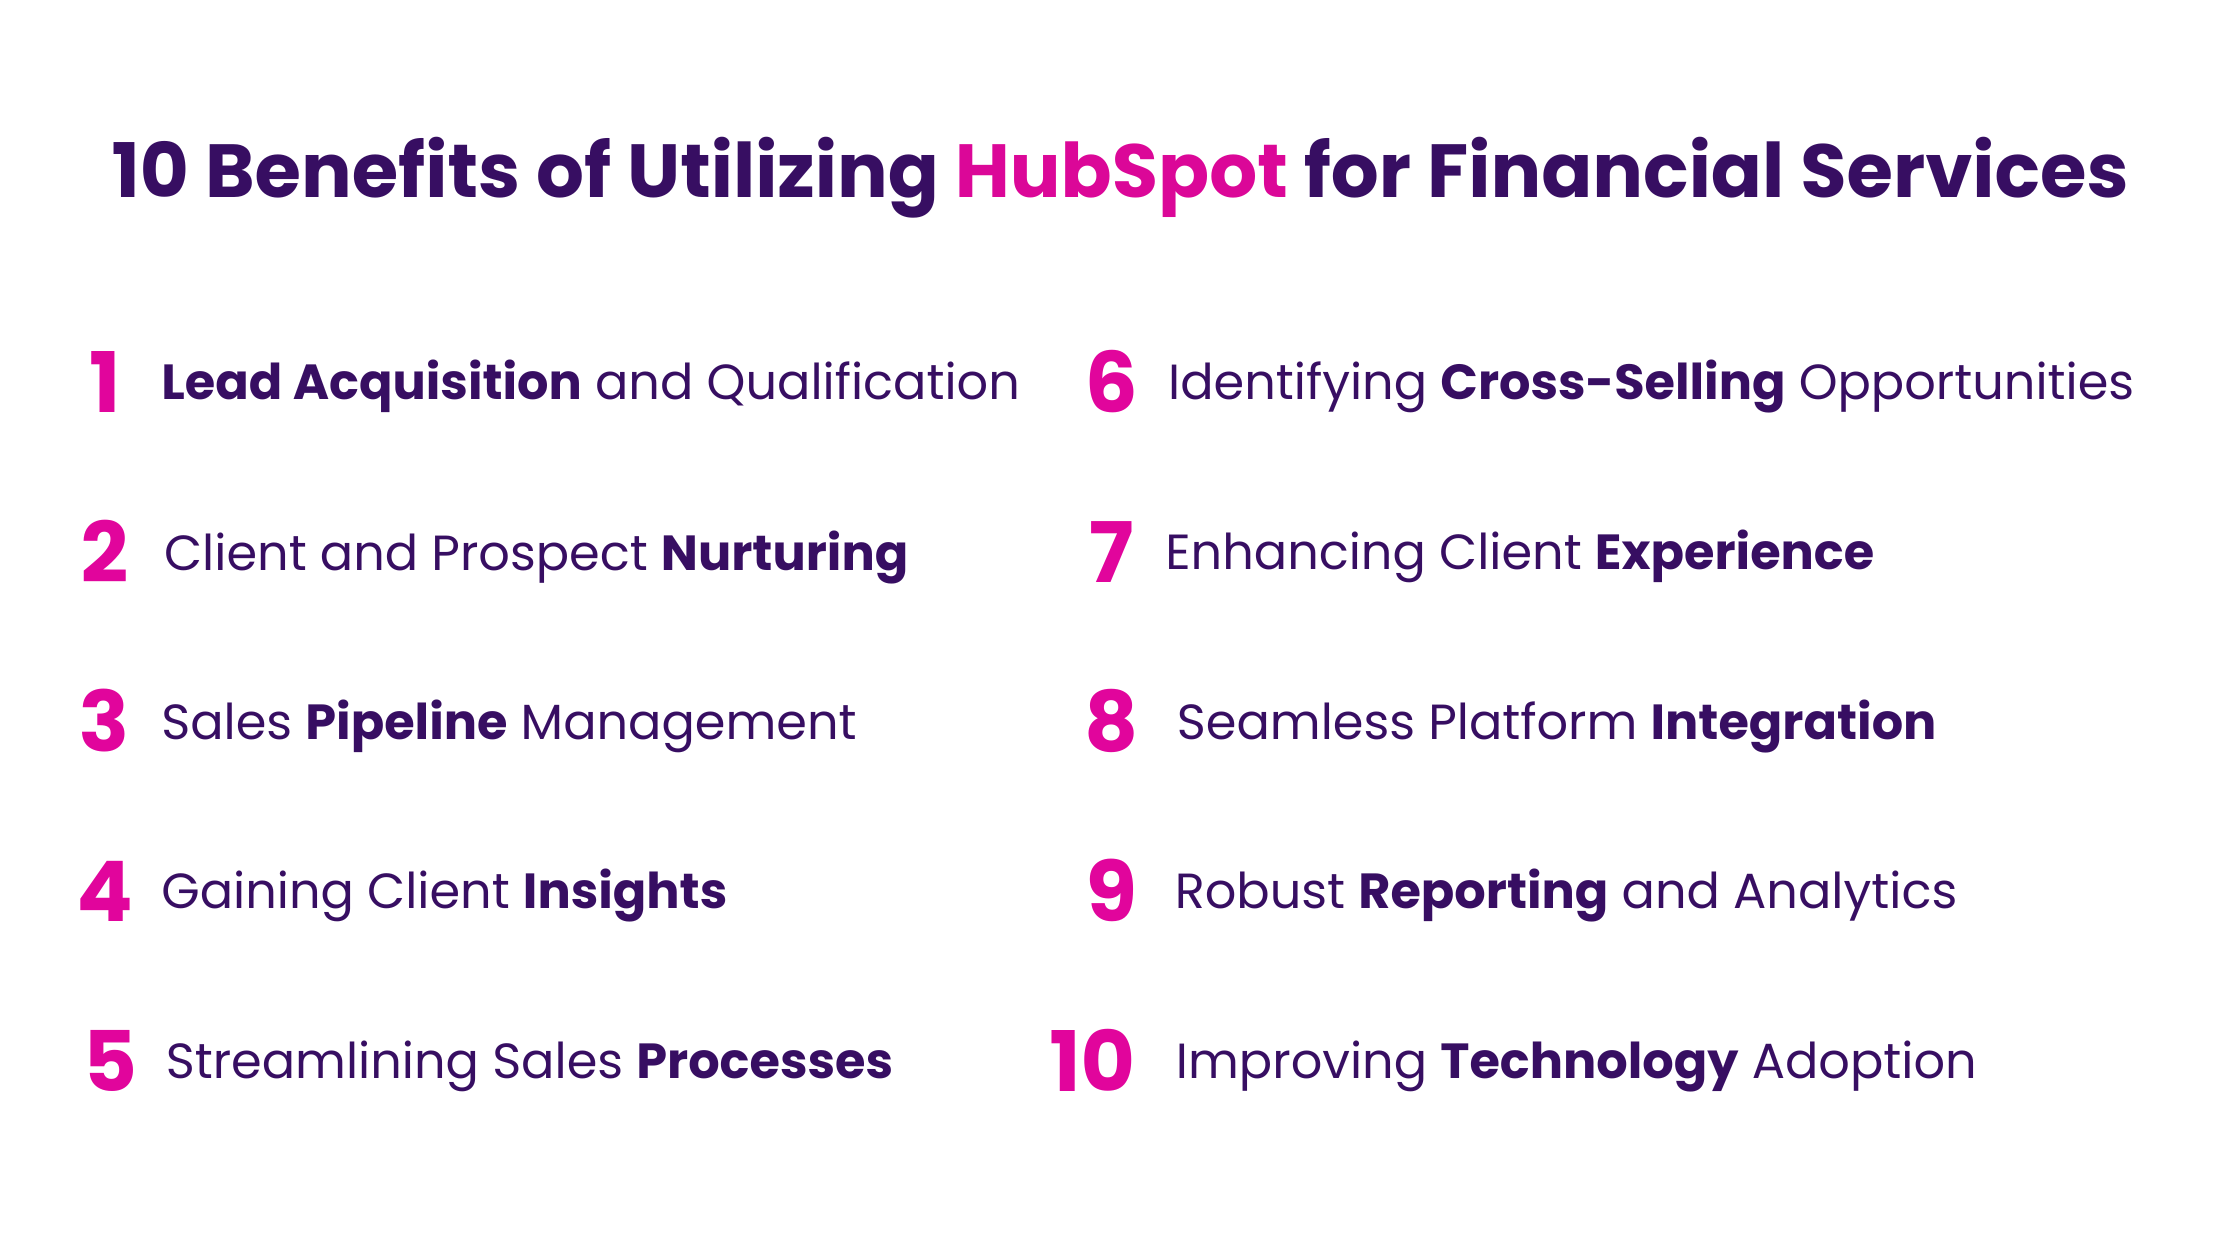 10 Benefits of Utilizing HubSpot for Financial Services